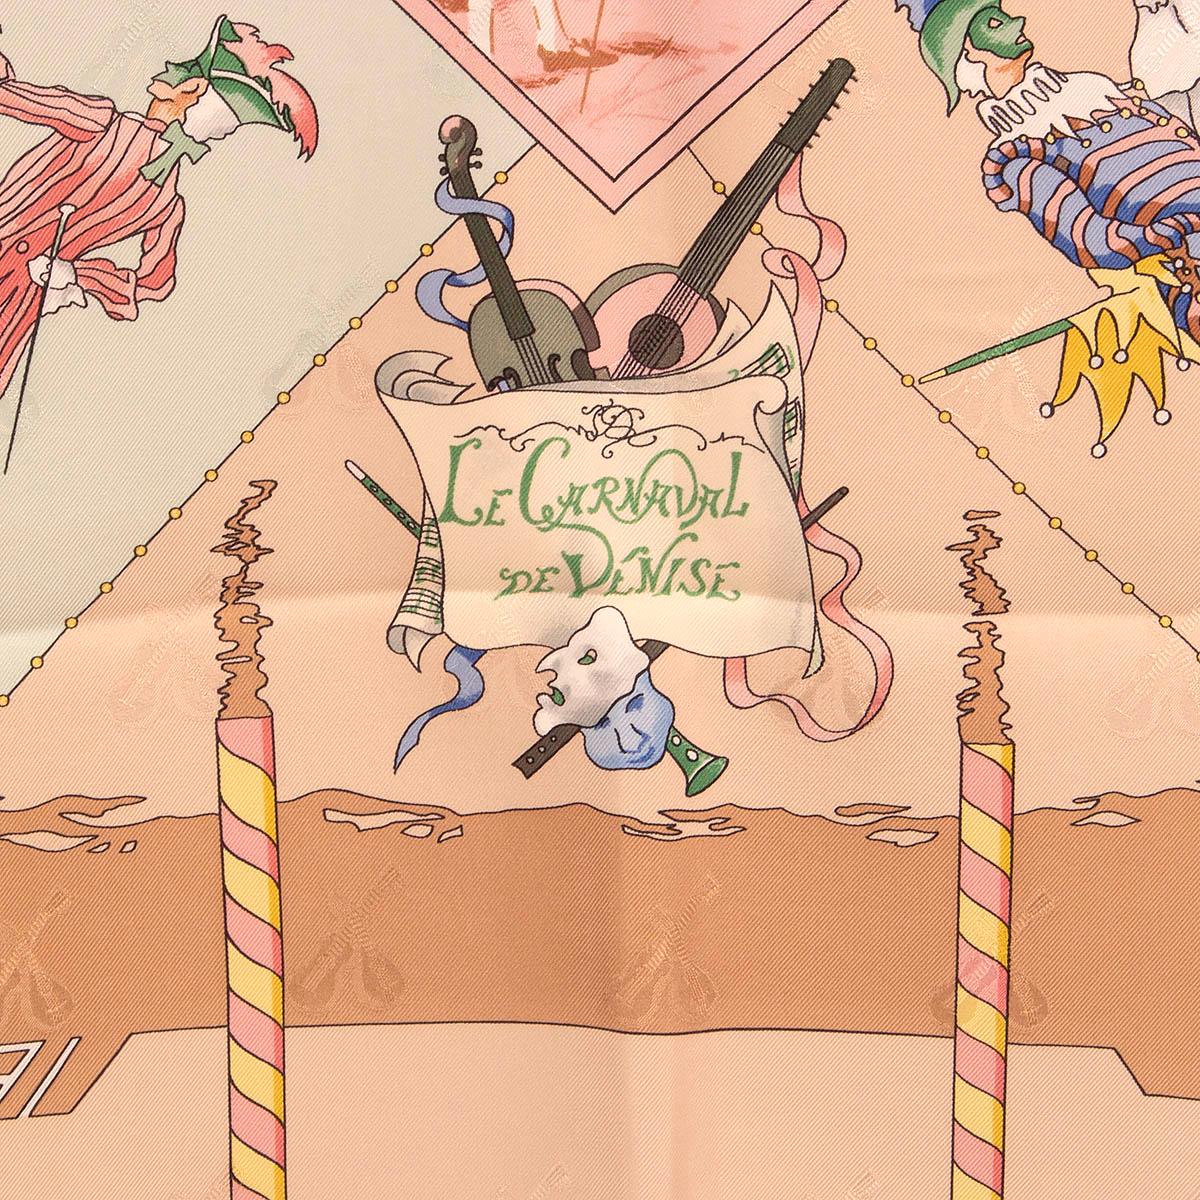 100% authentic Hermès 'Le Carnaval de Venise 90' scarf by Hubert de Watrigant in beige and pink silk jacquard (100%) with details in mint, geen, yellow and brown. Has been worn and is in excellent condition.

Measurements
Width	90cm